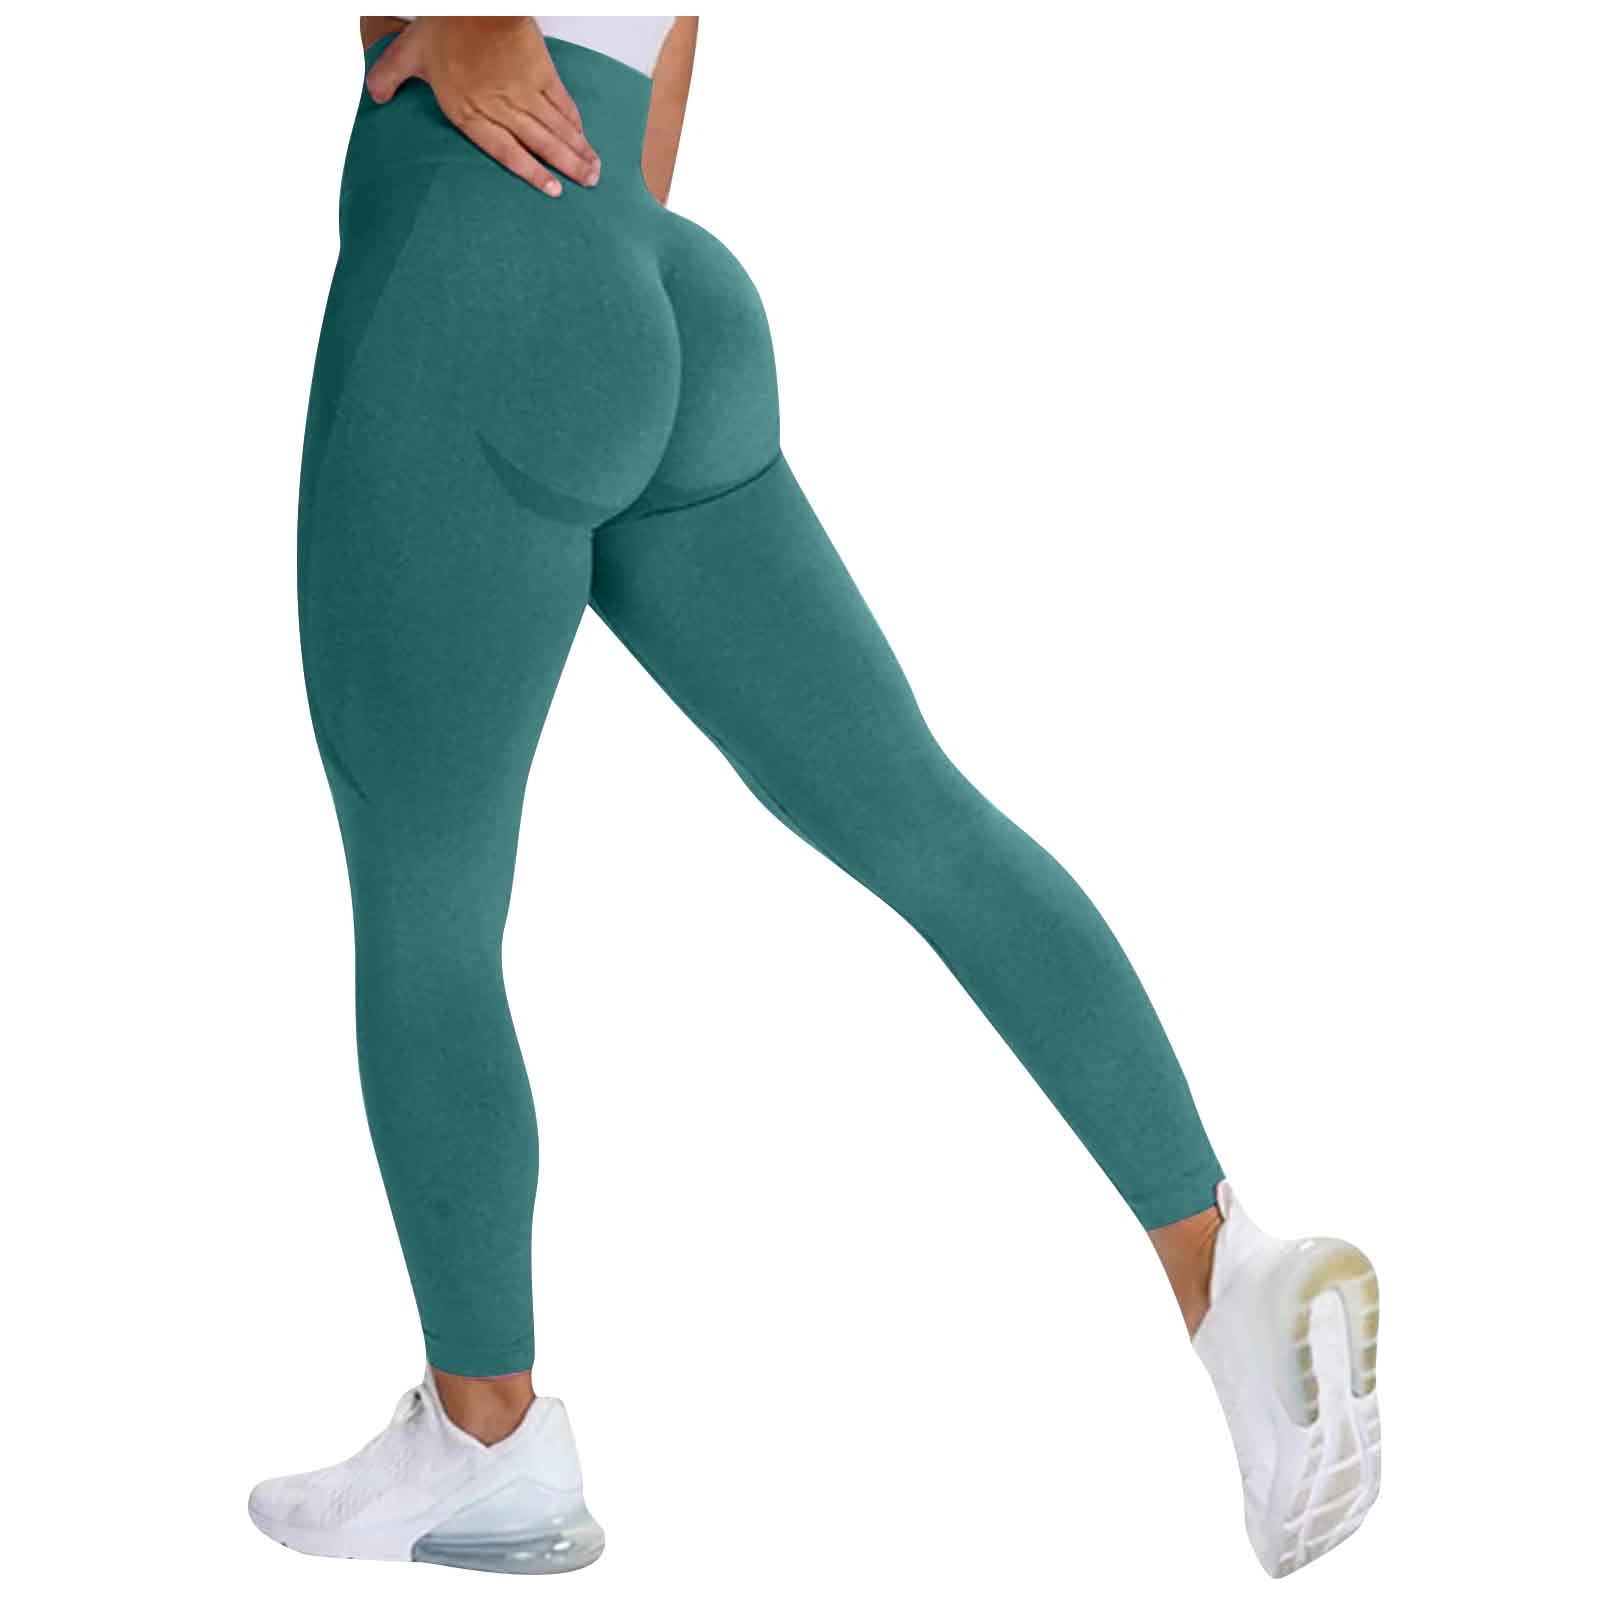 Bigersell Stretch Ripped Skinny Yoga Pants Yoga Full Length Pants Women  Scrunch Butt Lifting Workout Leggings Textured High Waist Cellulite  Compression Yoga Pants Tights Solid Blue Pant for Ladies 